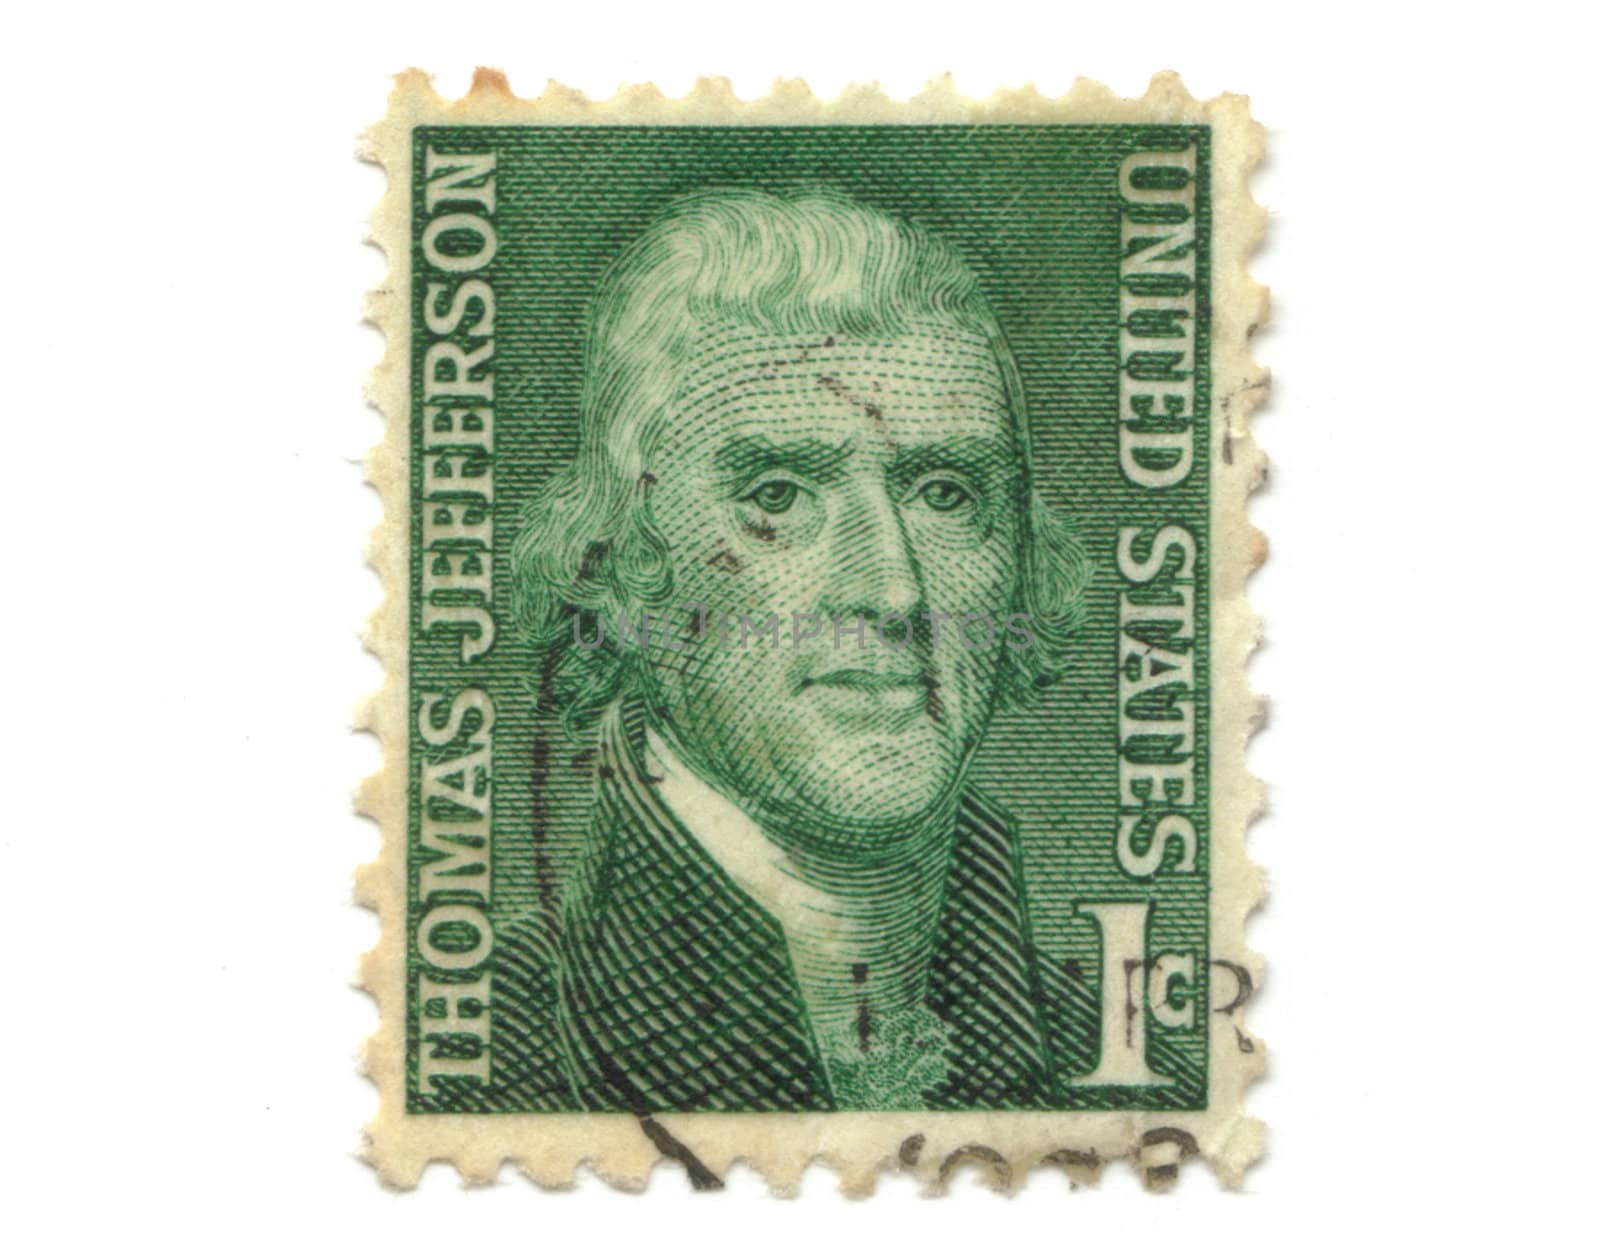 old postage stamp from USA 1 cent - Thomas Jefferson